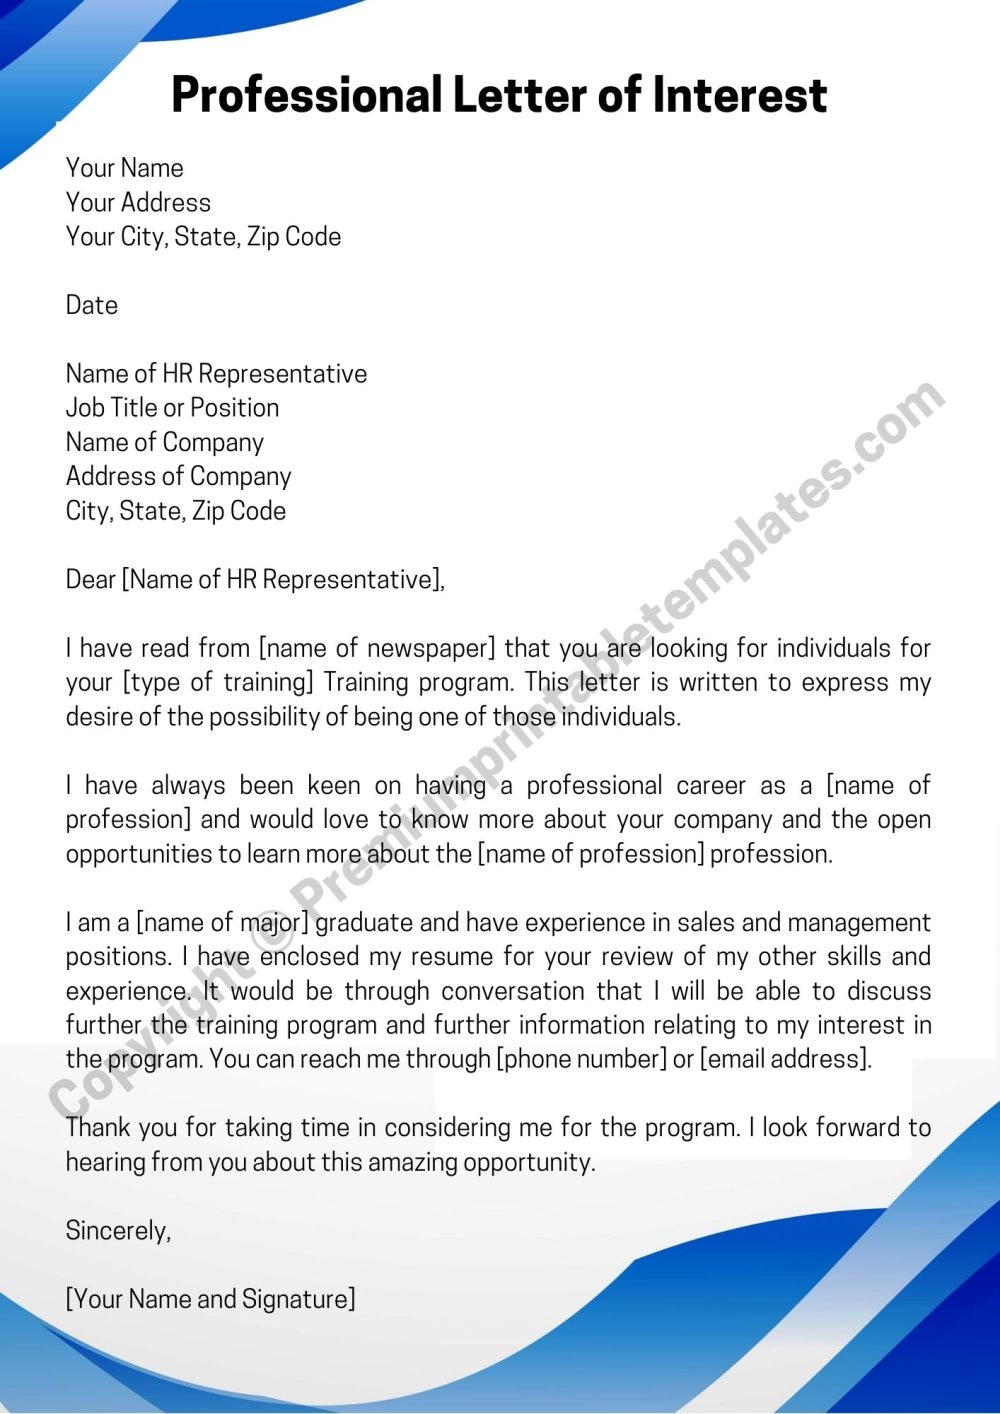 Printable Professional Letter of Interest